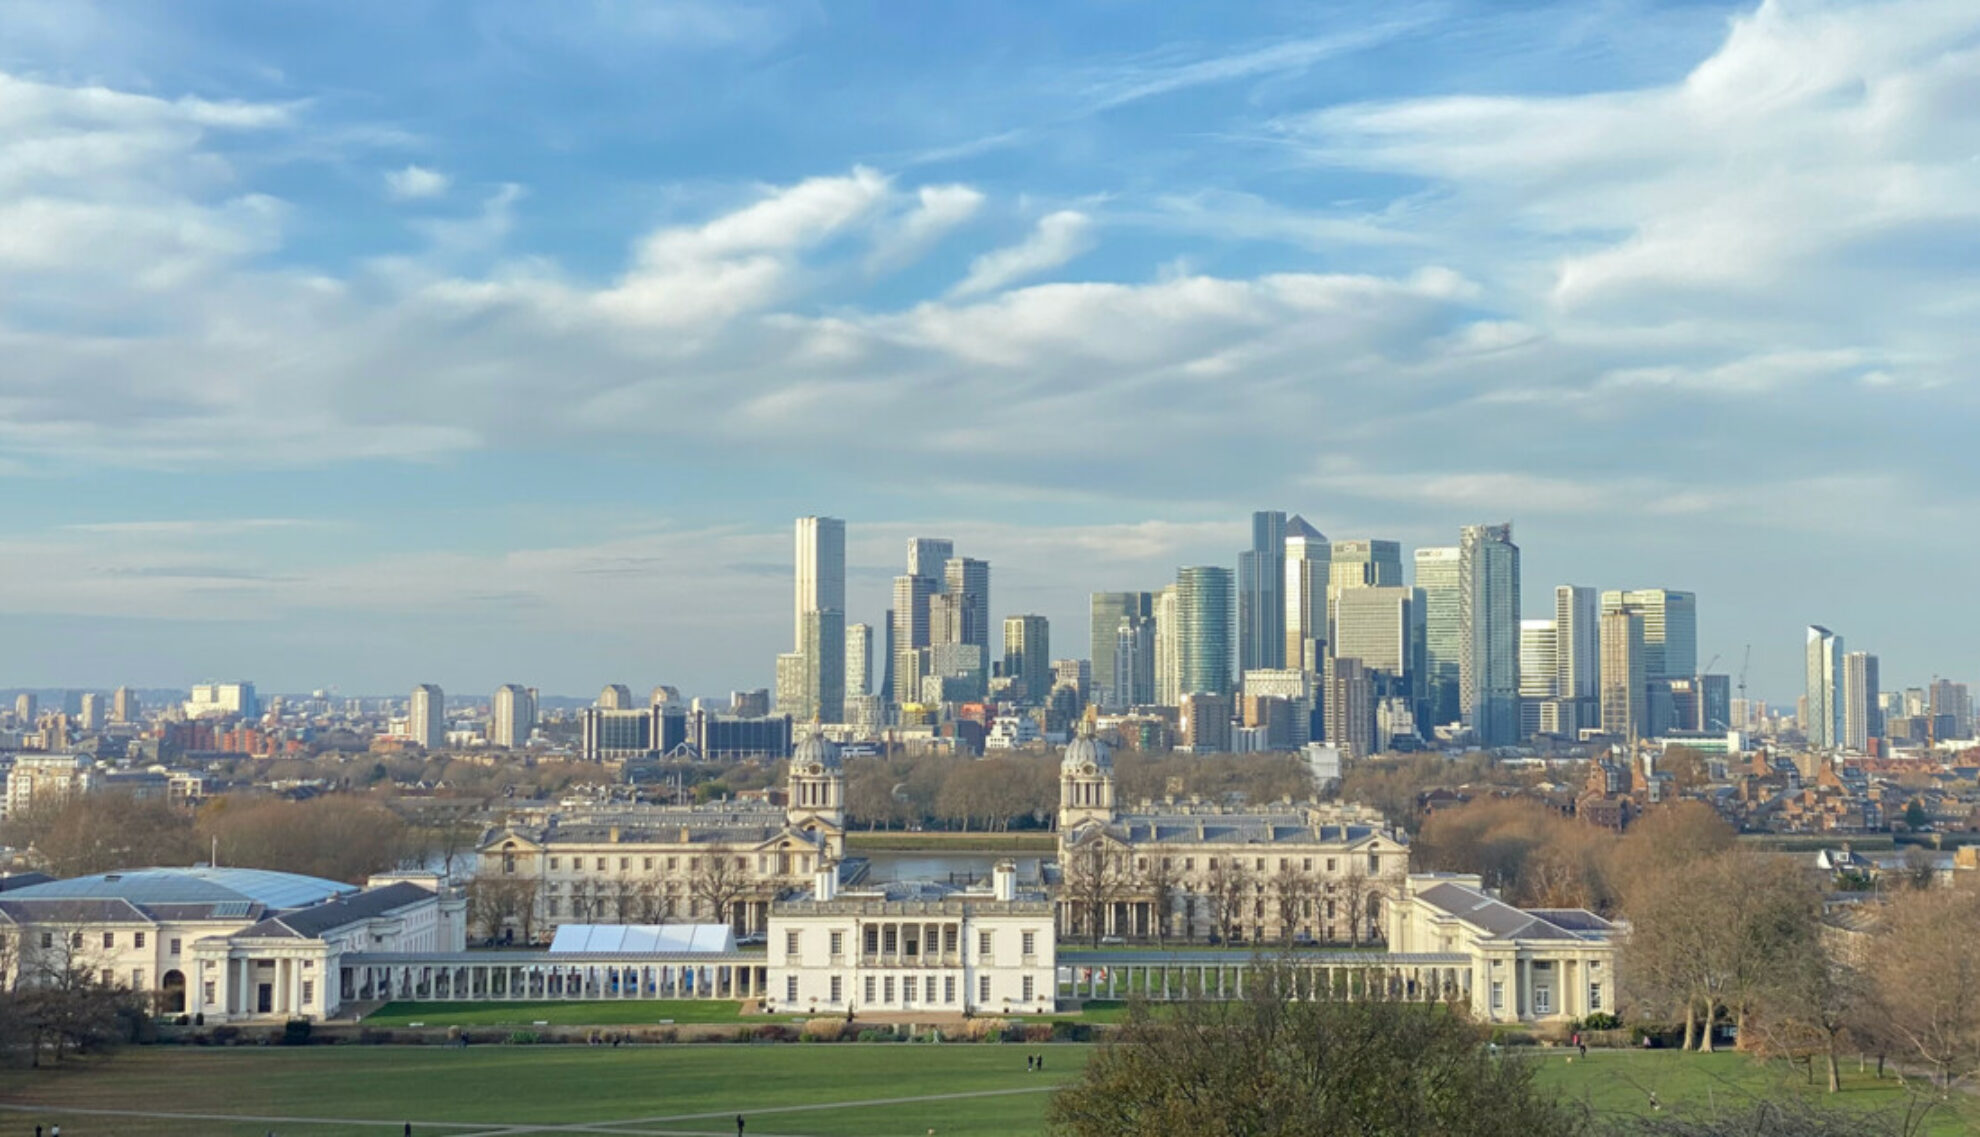 The view across Greenwich Park and the Isle of Dogs